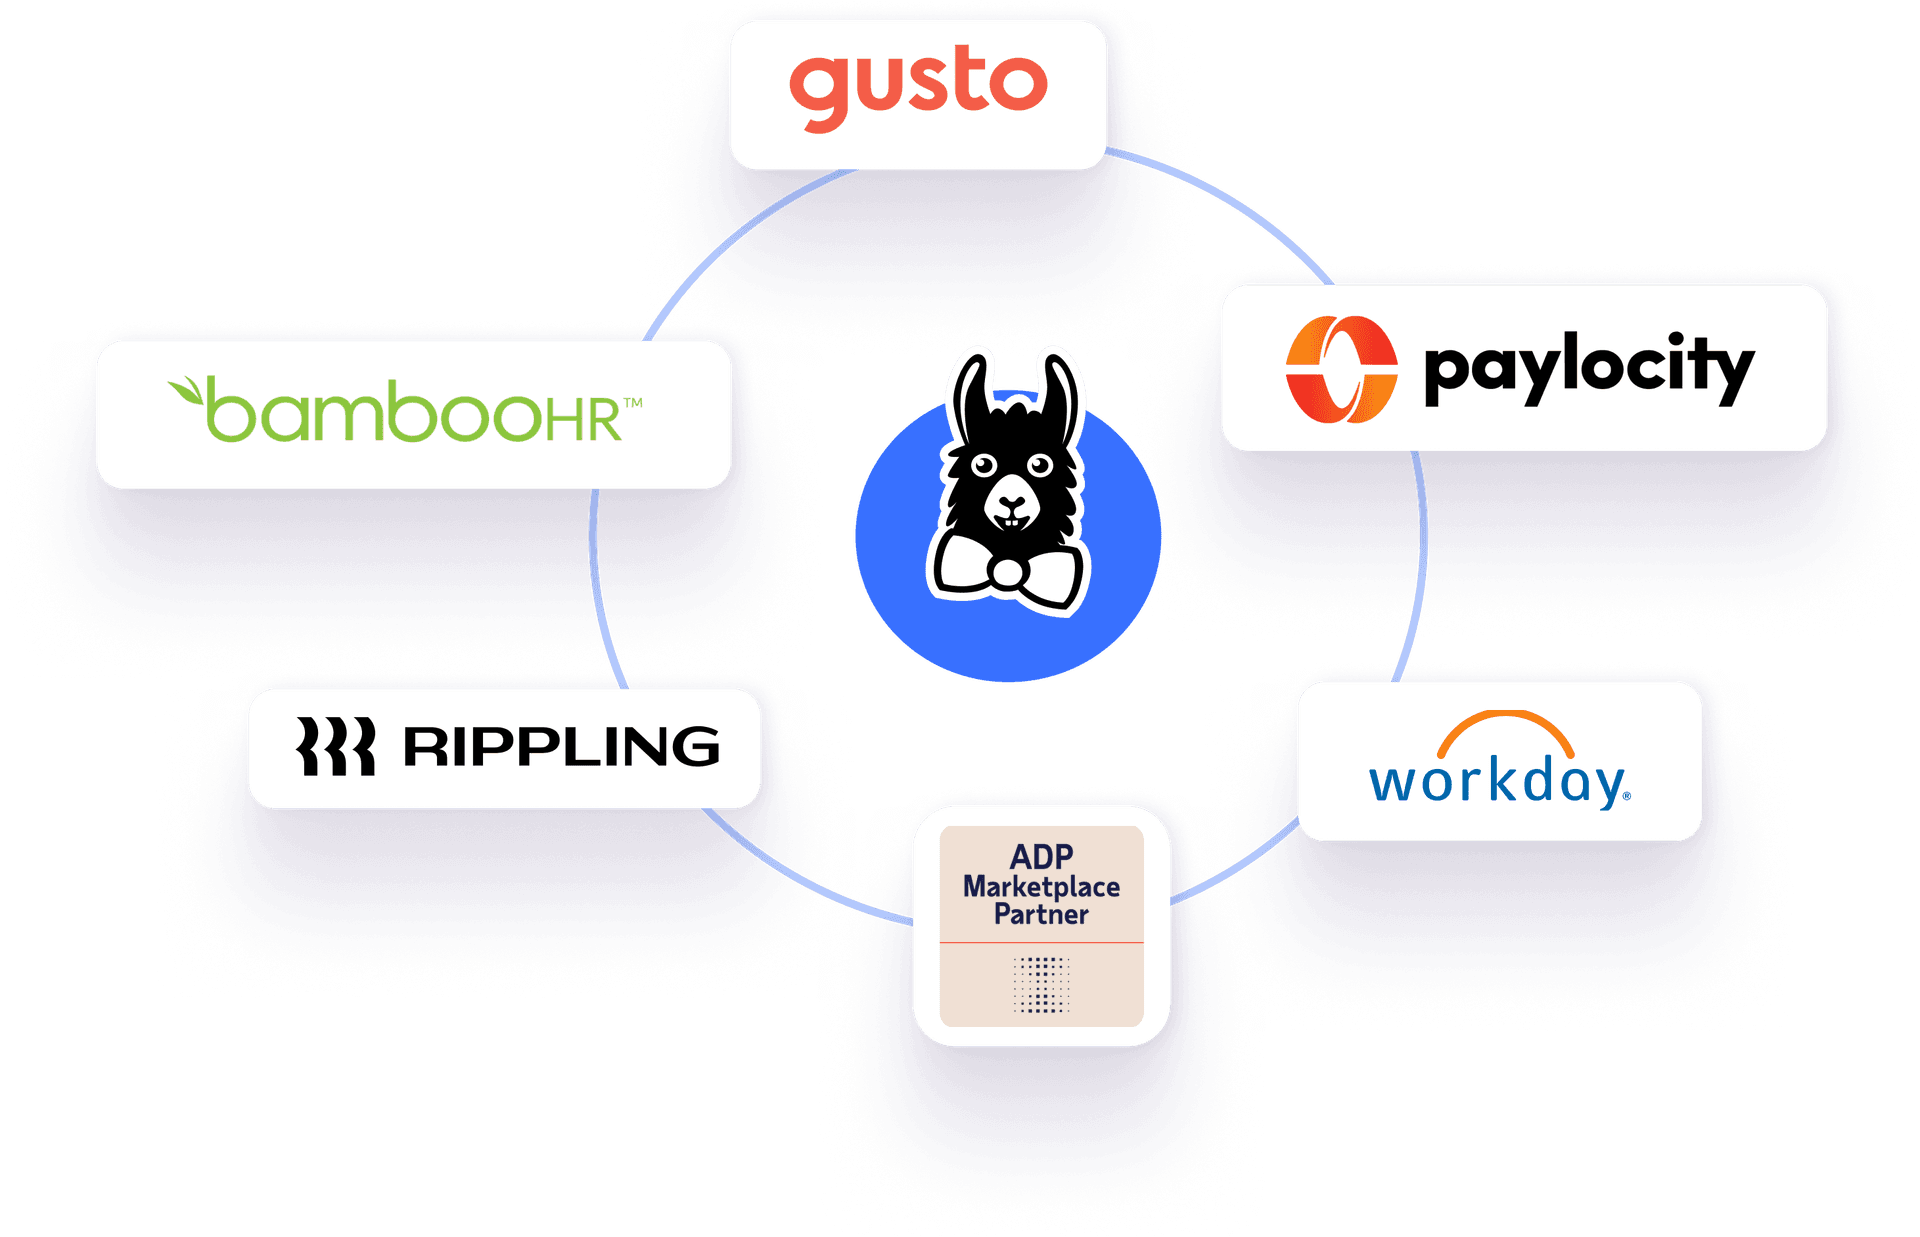 Gusto, bamboo hr, paylocity, rippling, ADP marketplace partner, workday